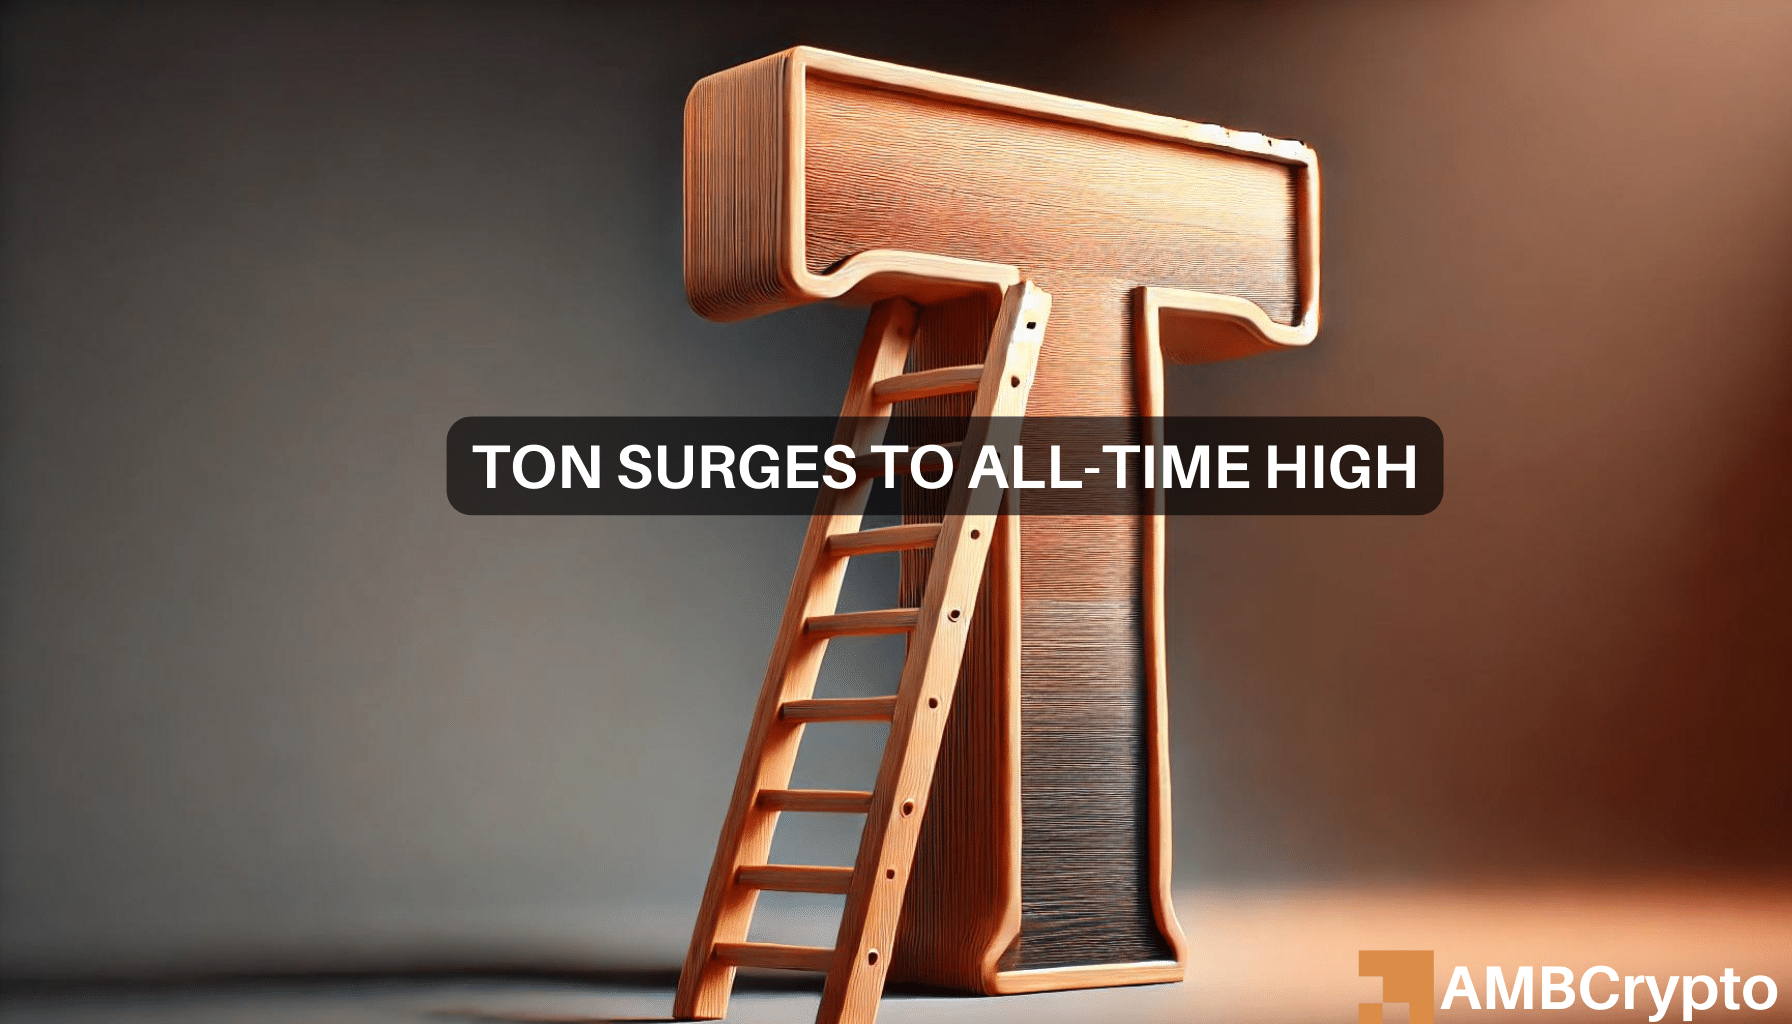 Toncoin – Will another ATH follow its latest high? Metrics say…